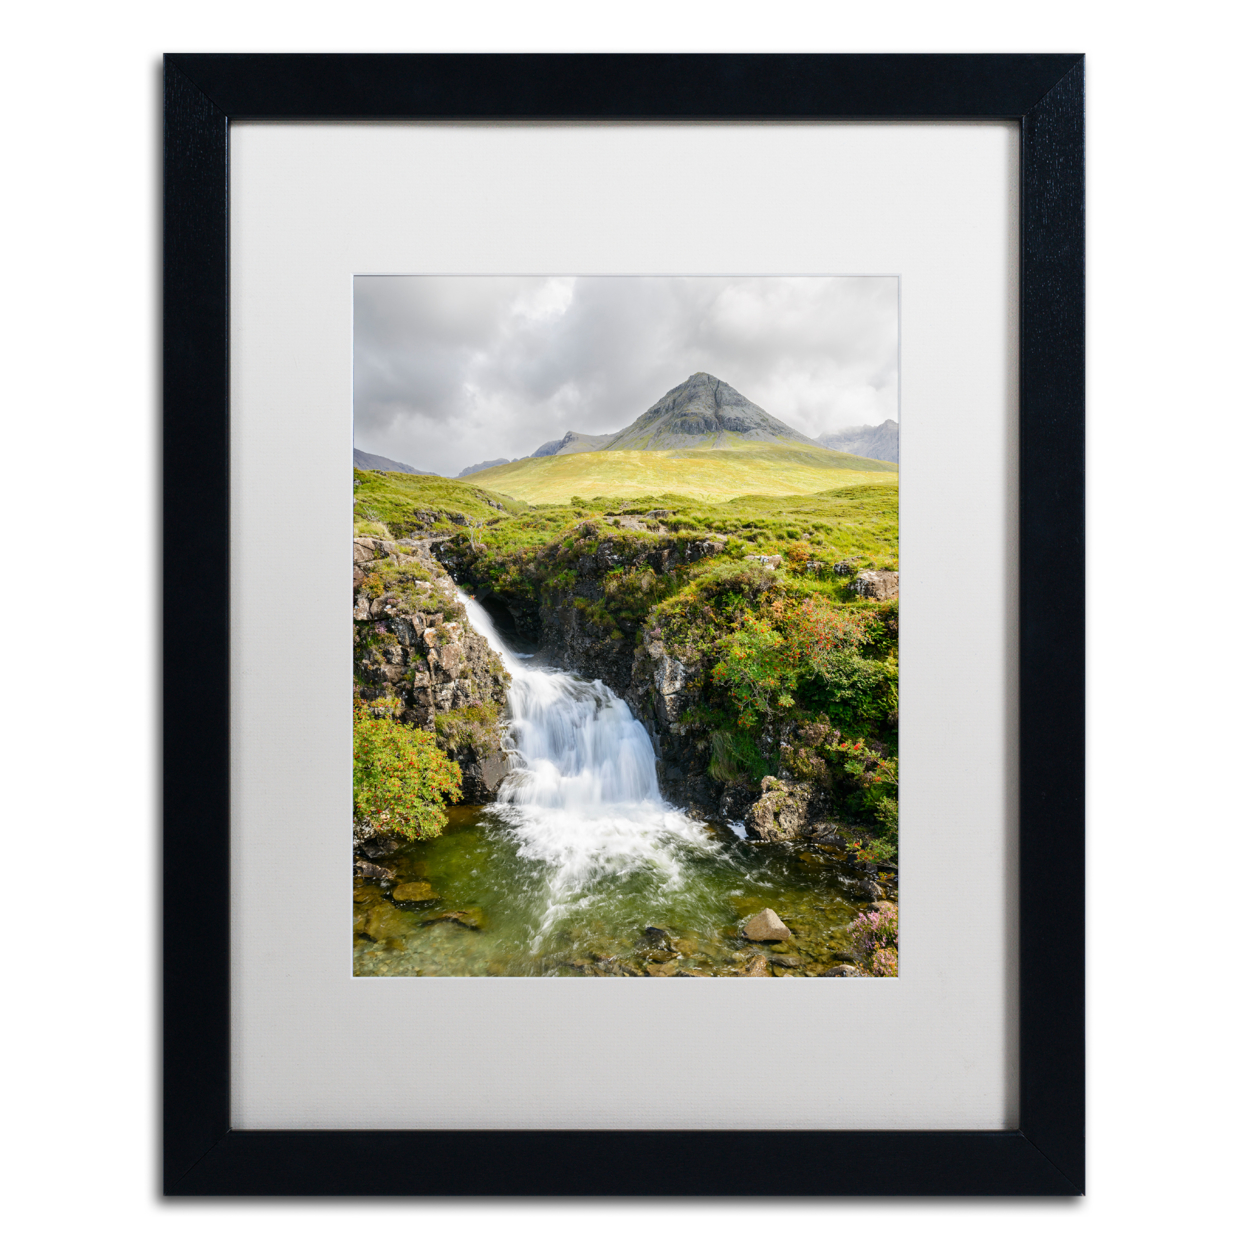 Michael Blanchette Photography 'Waterfall' Black Wooden Framed Art 18 X 22 Inches